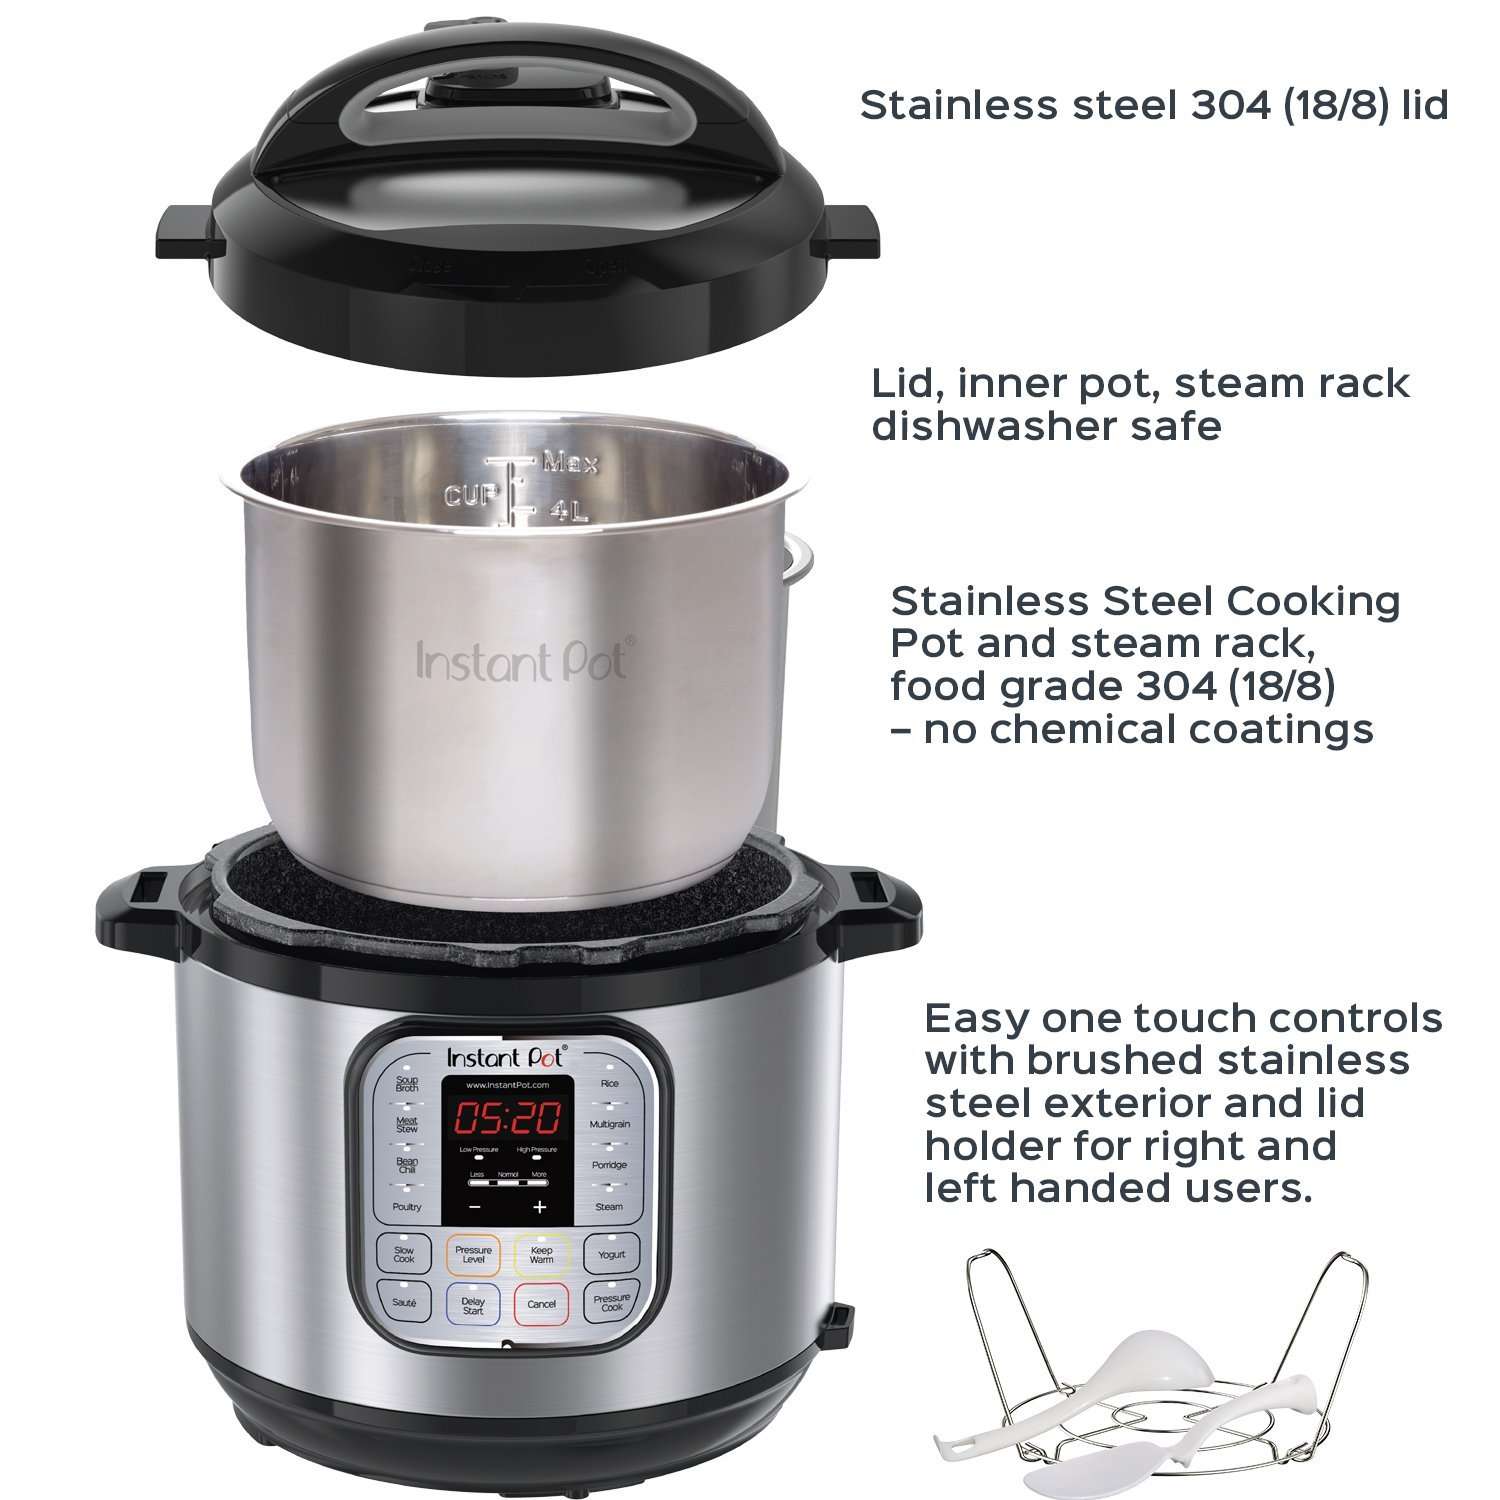 The Instant Pot: Basics and How